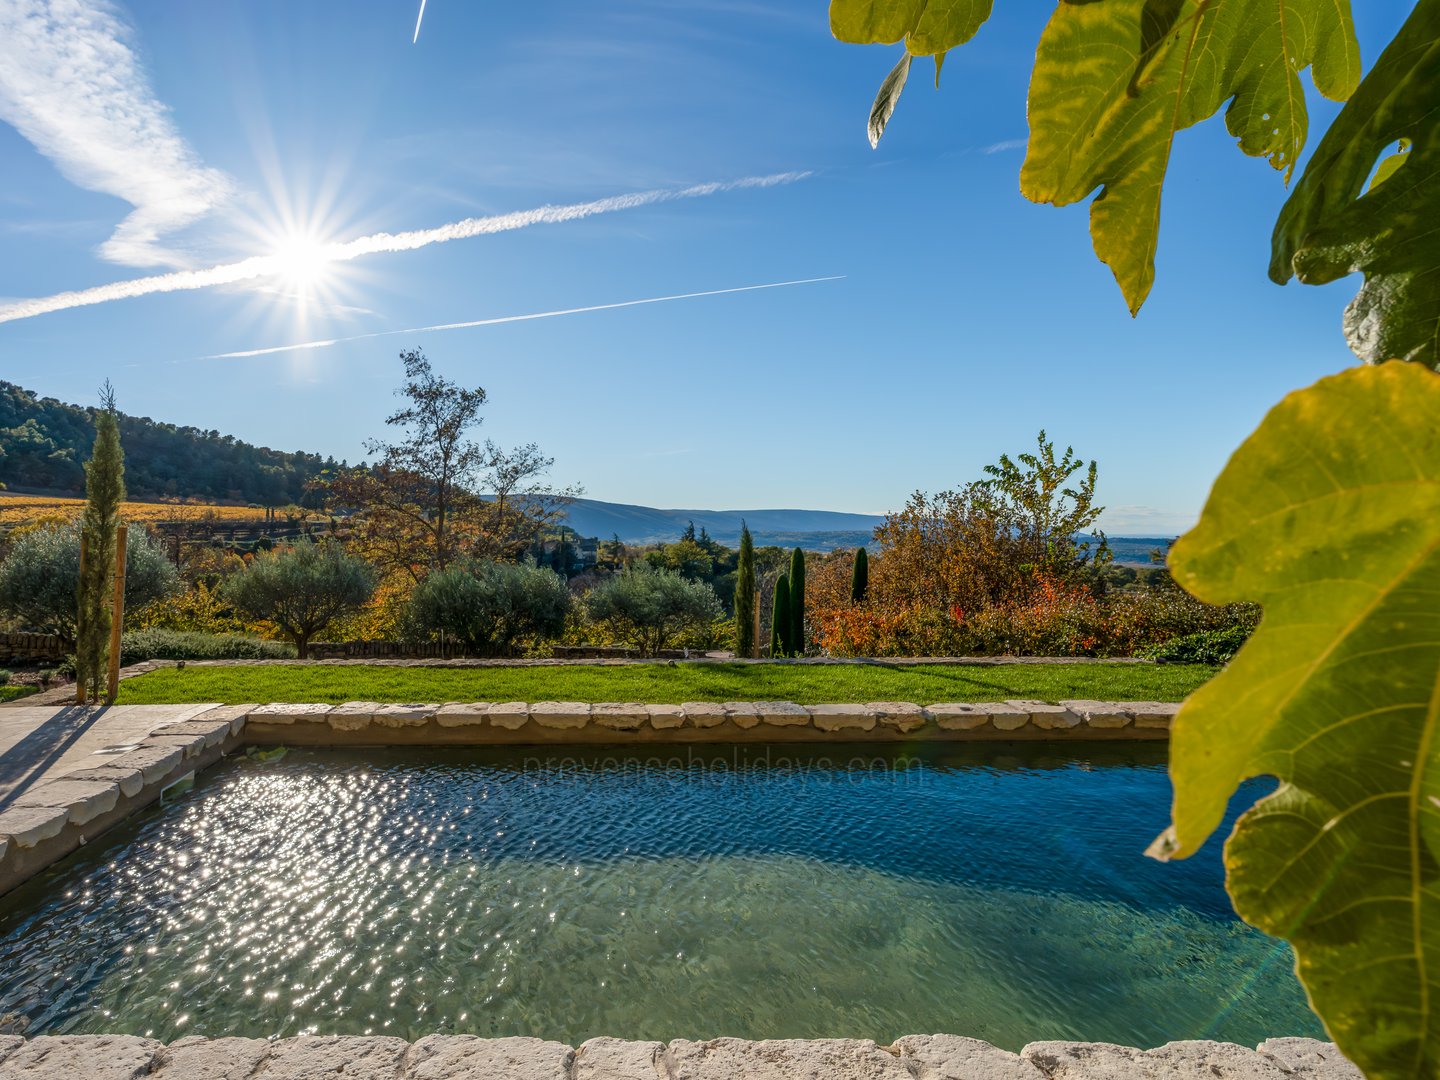 18th century Bastide with views of Luberon for sale - Bonnieux - 27